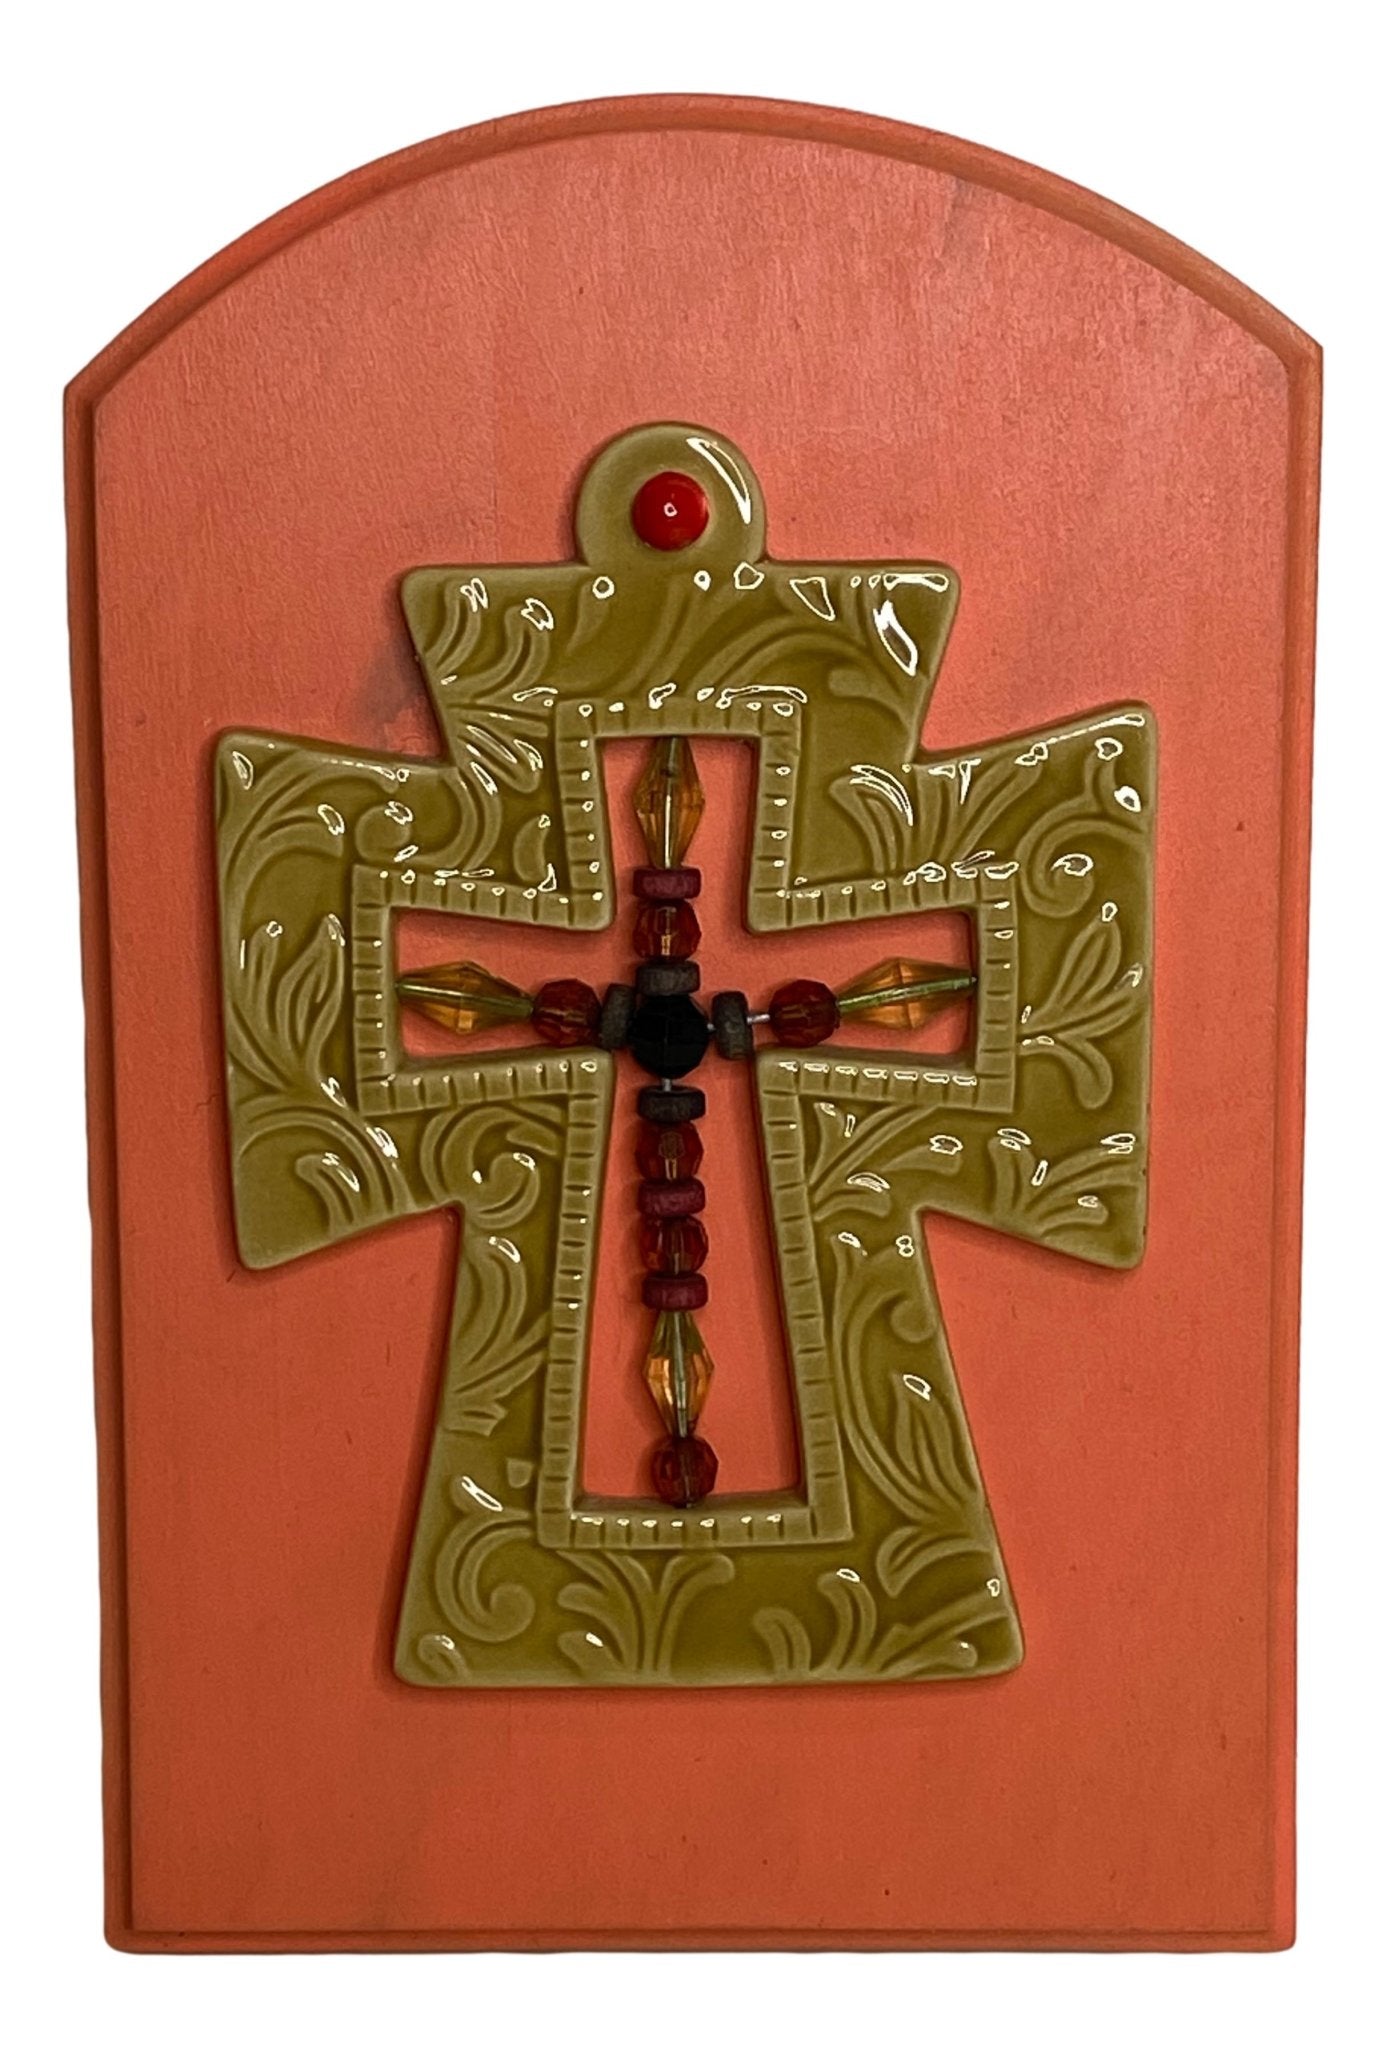 Cross Ceramic Wood Wall Art Acrylic Wood Bead Cross Center Handcrafted by Local Artist Norma 5 1/2 L x 3/4 W x 8 1/2 H Inches - Ysleta Mission Gift Shop- VOTED 2022 El Paso's Best Gift Shop